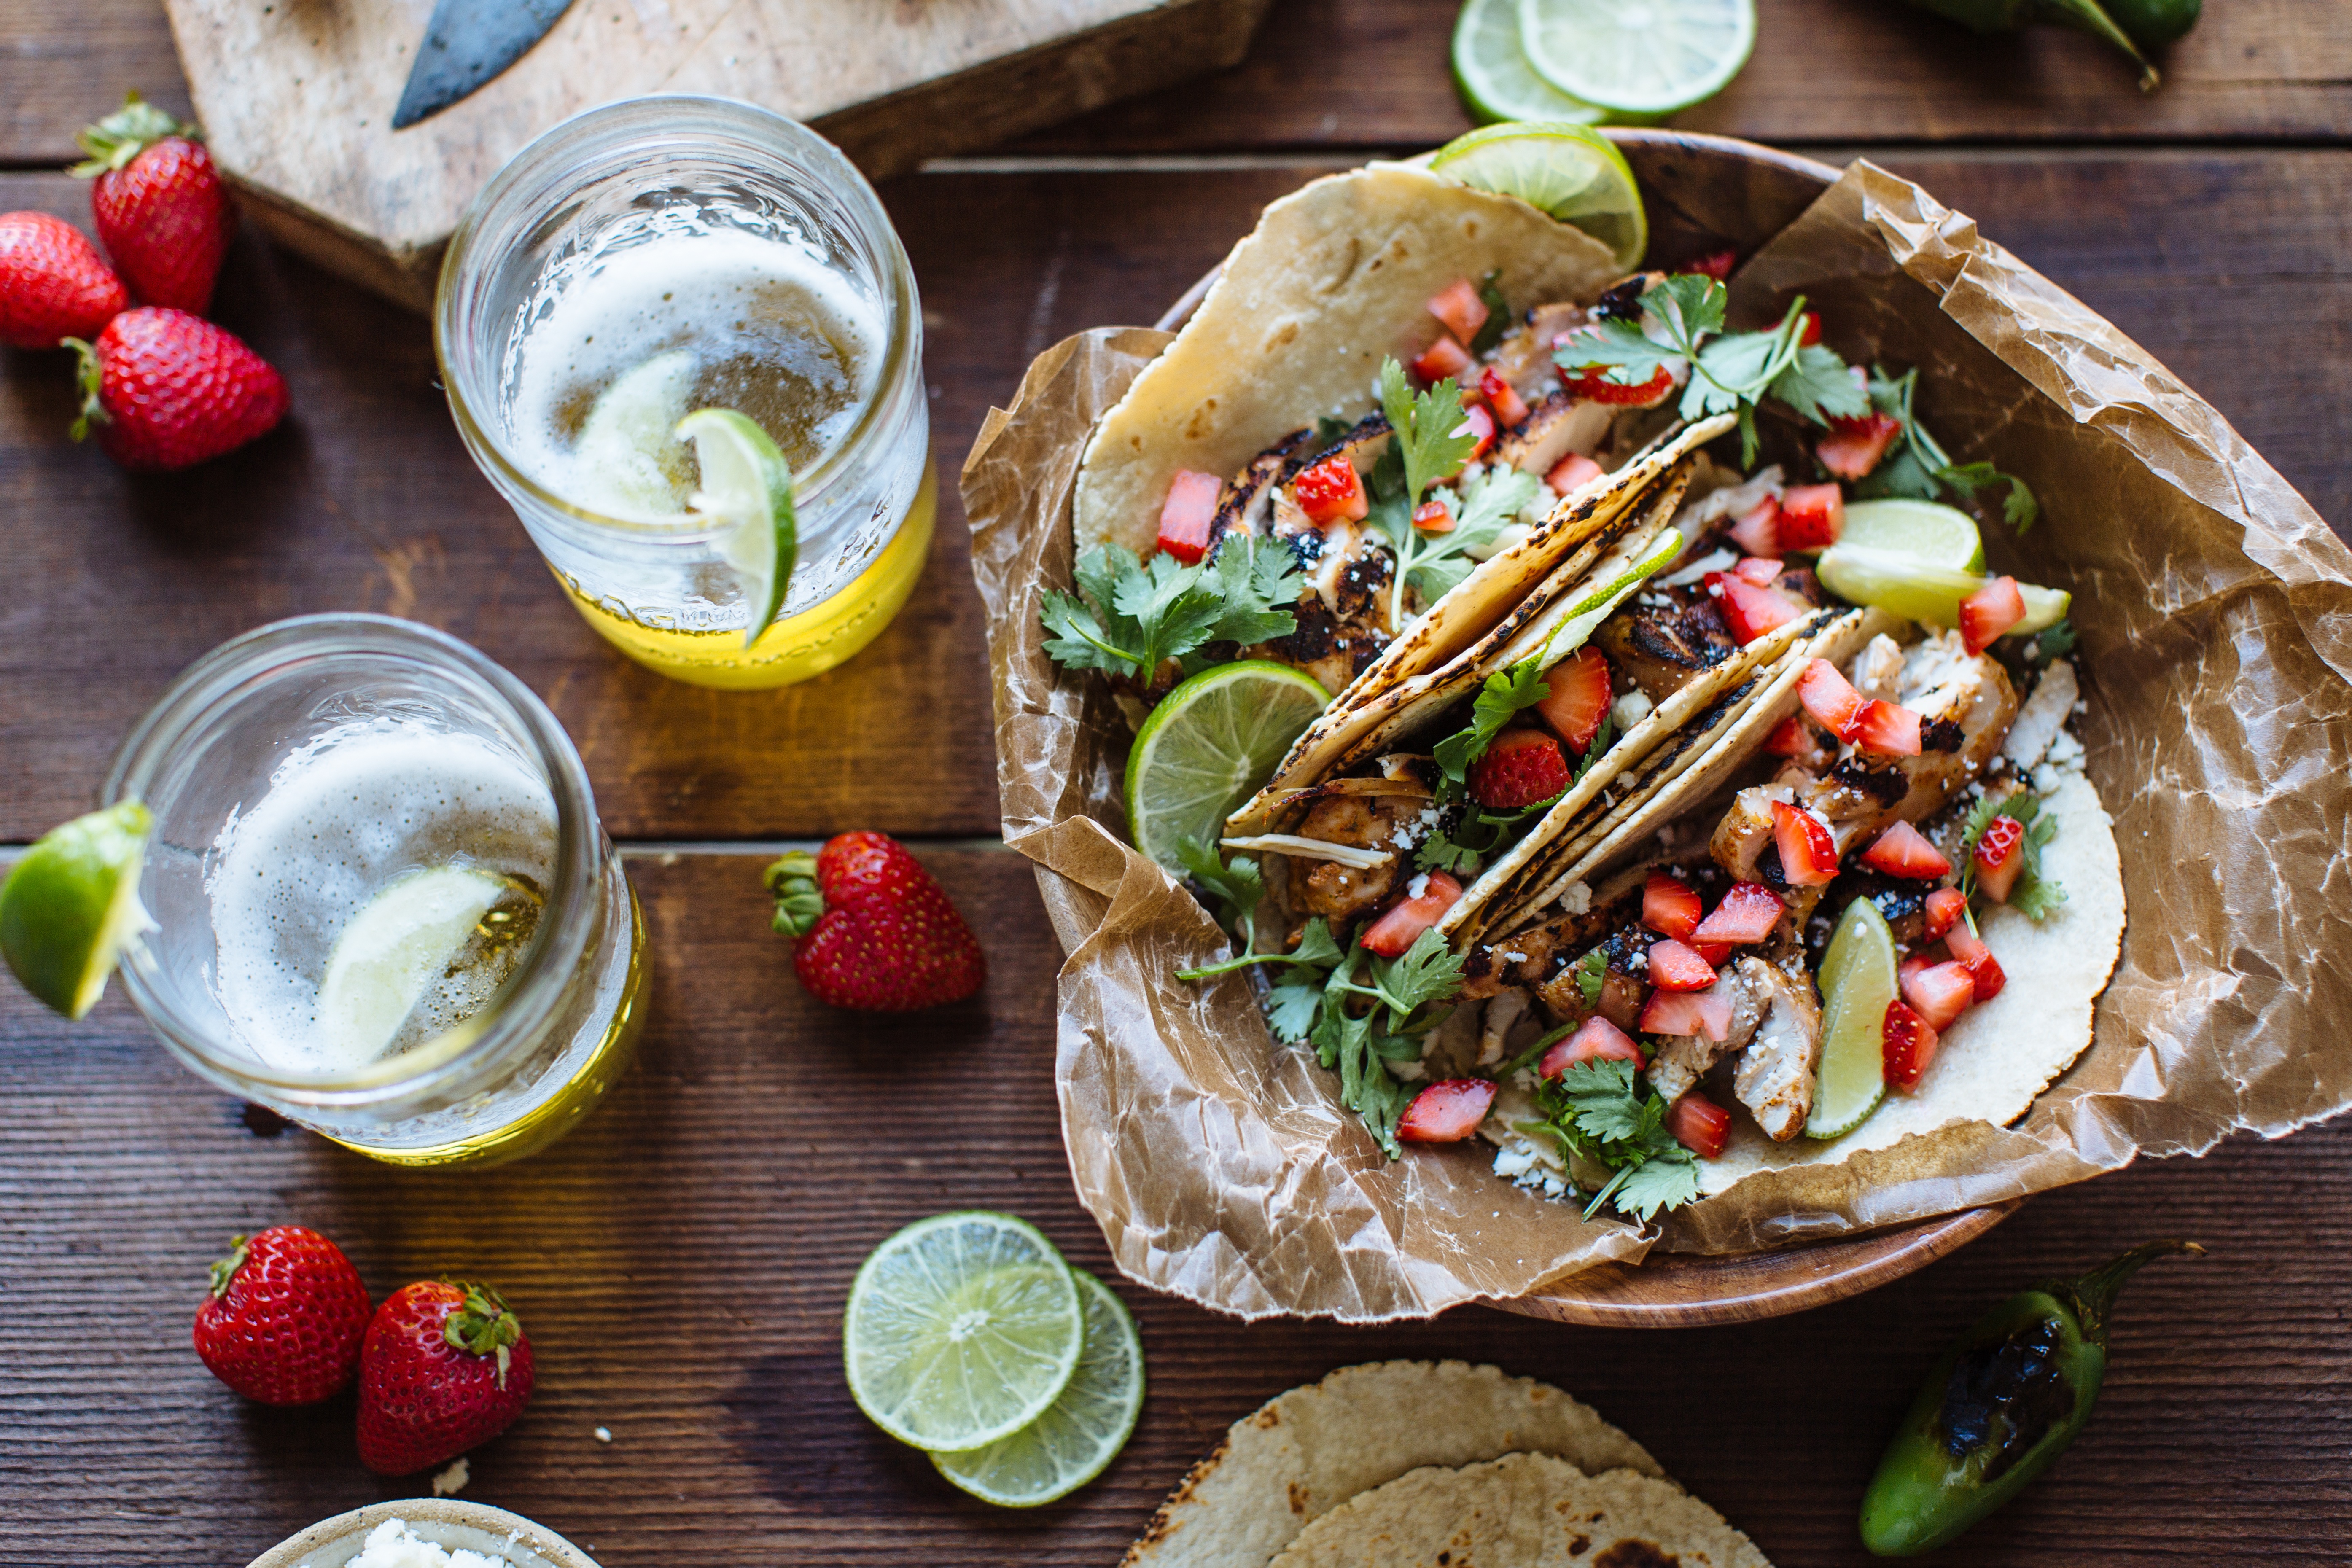 chicken tacos topped with diced strawberries, cilantro, and a wedge of lime